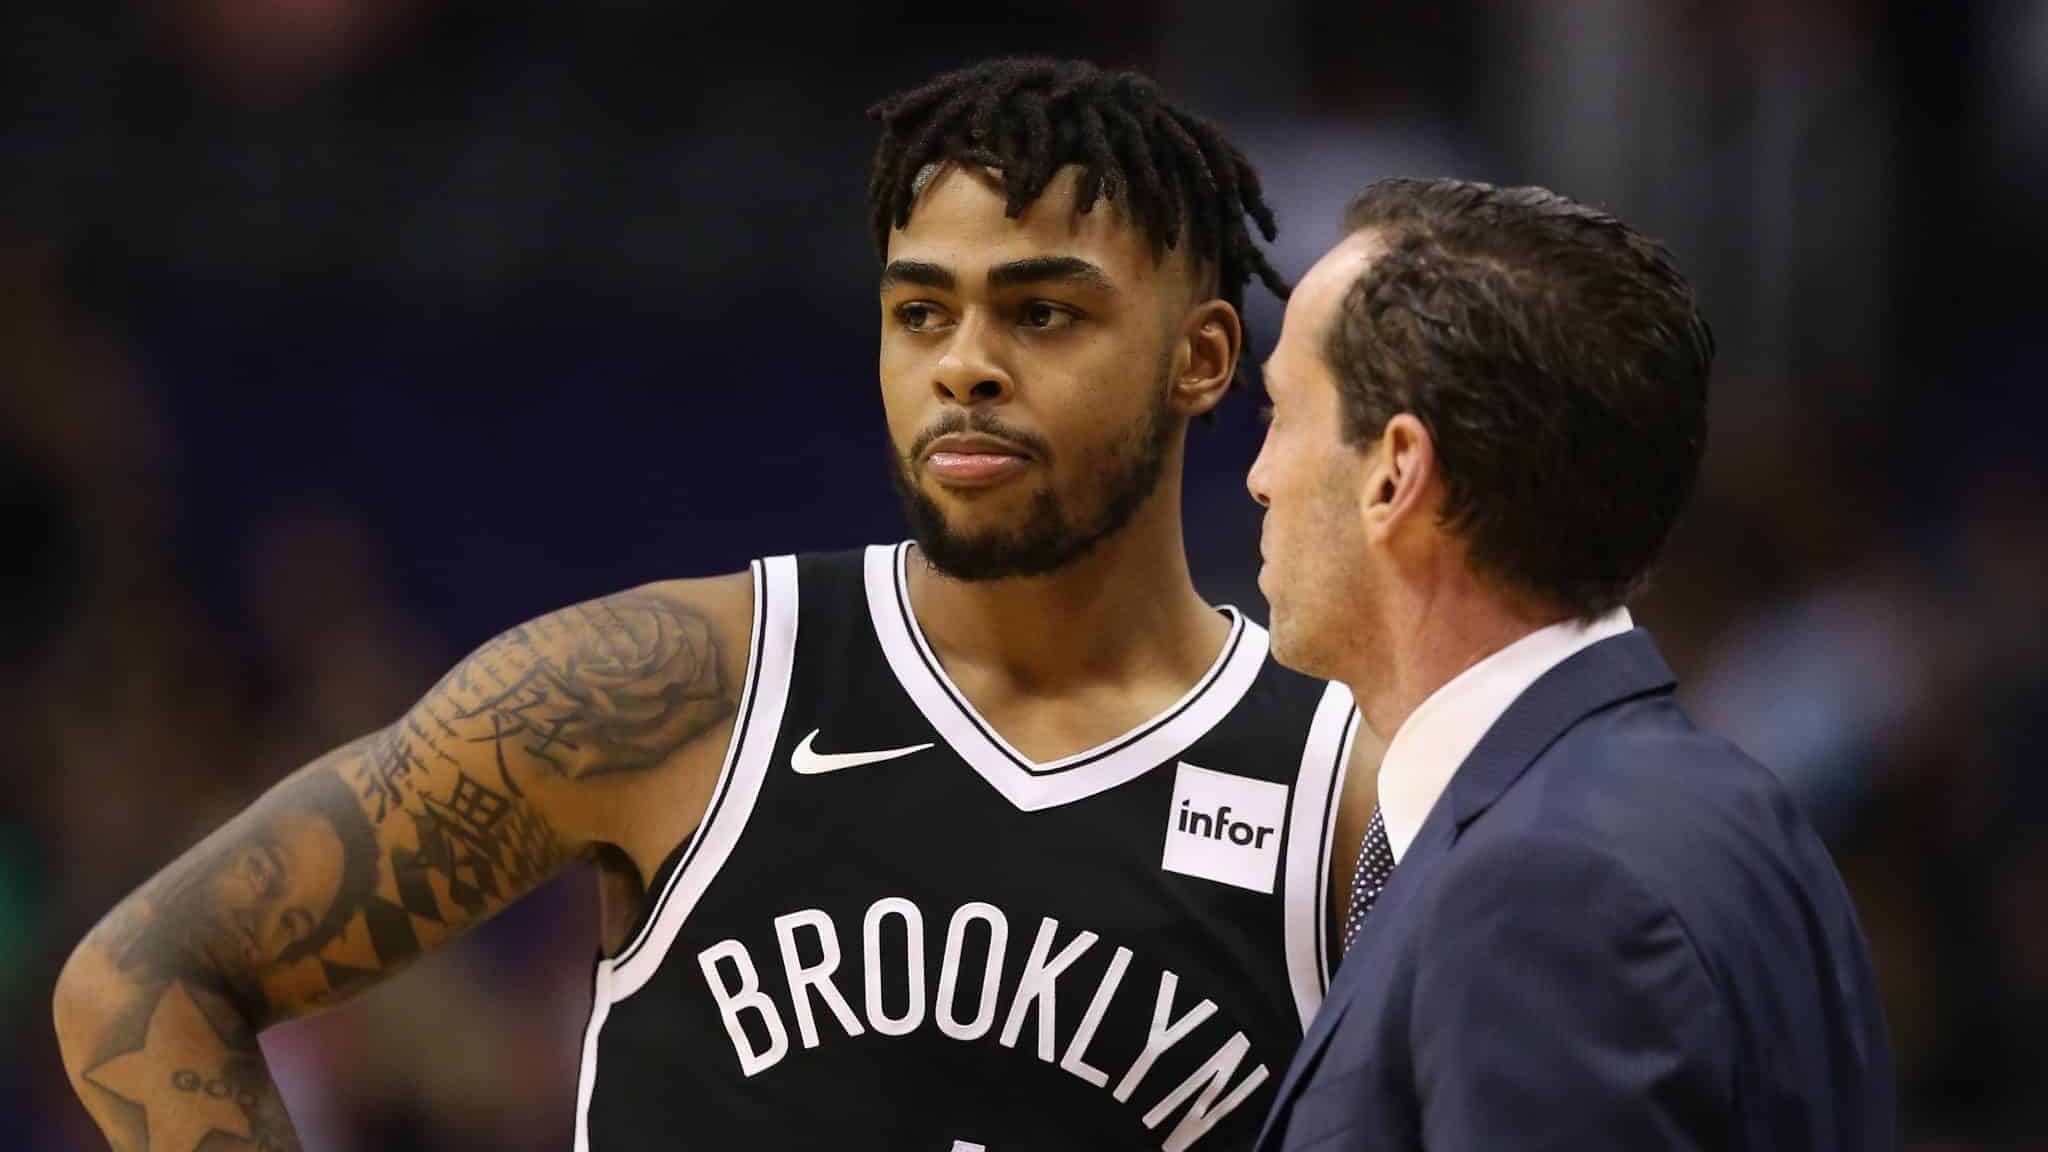 PHOENIX, AZ - NOVEMBER 06: D'Angelo Russell #1 and head coach Kenny Atkinson of the Brooklyn Nets during the NBA game against the Phoenix Suns at Talking Stick Resort Arena on November 6, 2017 in Phoenix, Arizona. The Nets defeated the Suns 98-92. NOTE TO USER: User expressly acknowledges and agrees that, by downloading and or using this photograph, User is consenting to the terms and conditions of the Getty Images License Agreement.